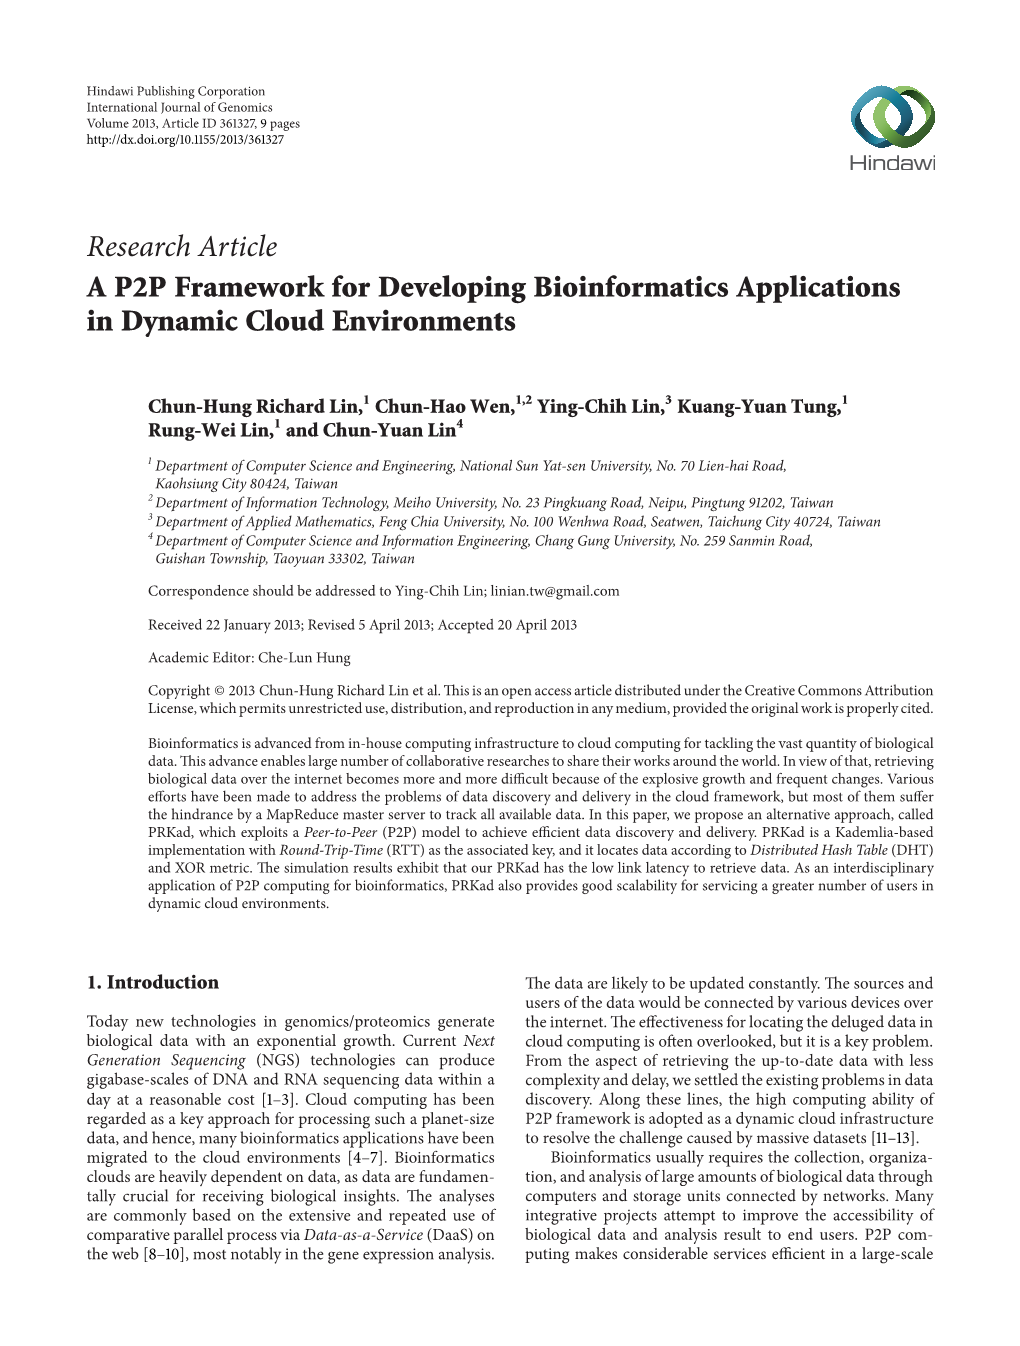 Research Article a P2P Framework for Developing Bioinformatics Applications in Dynamic Cloud Environments